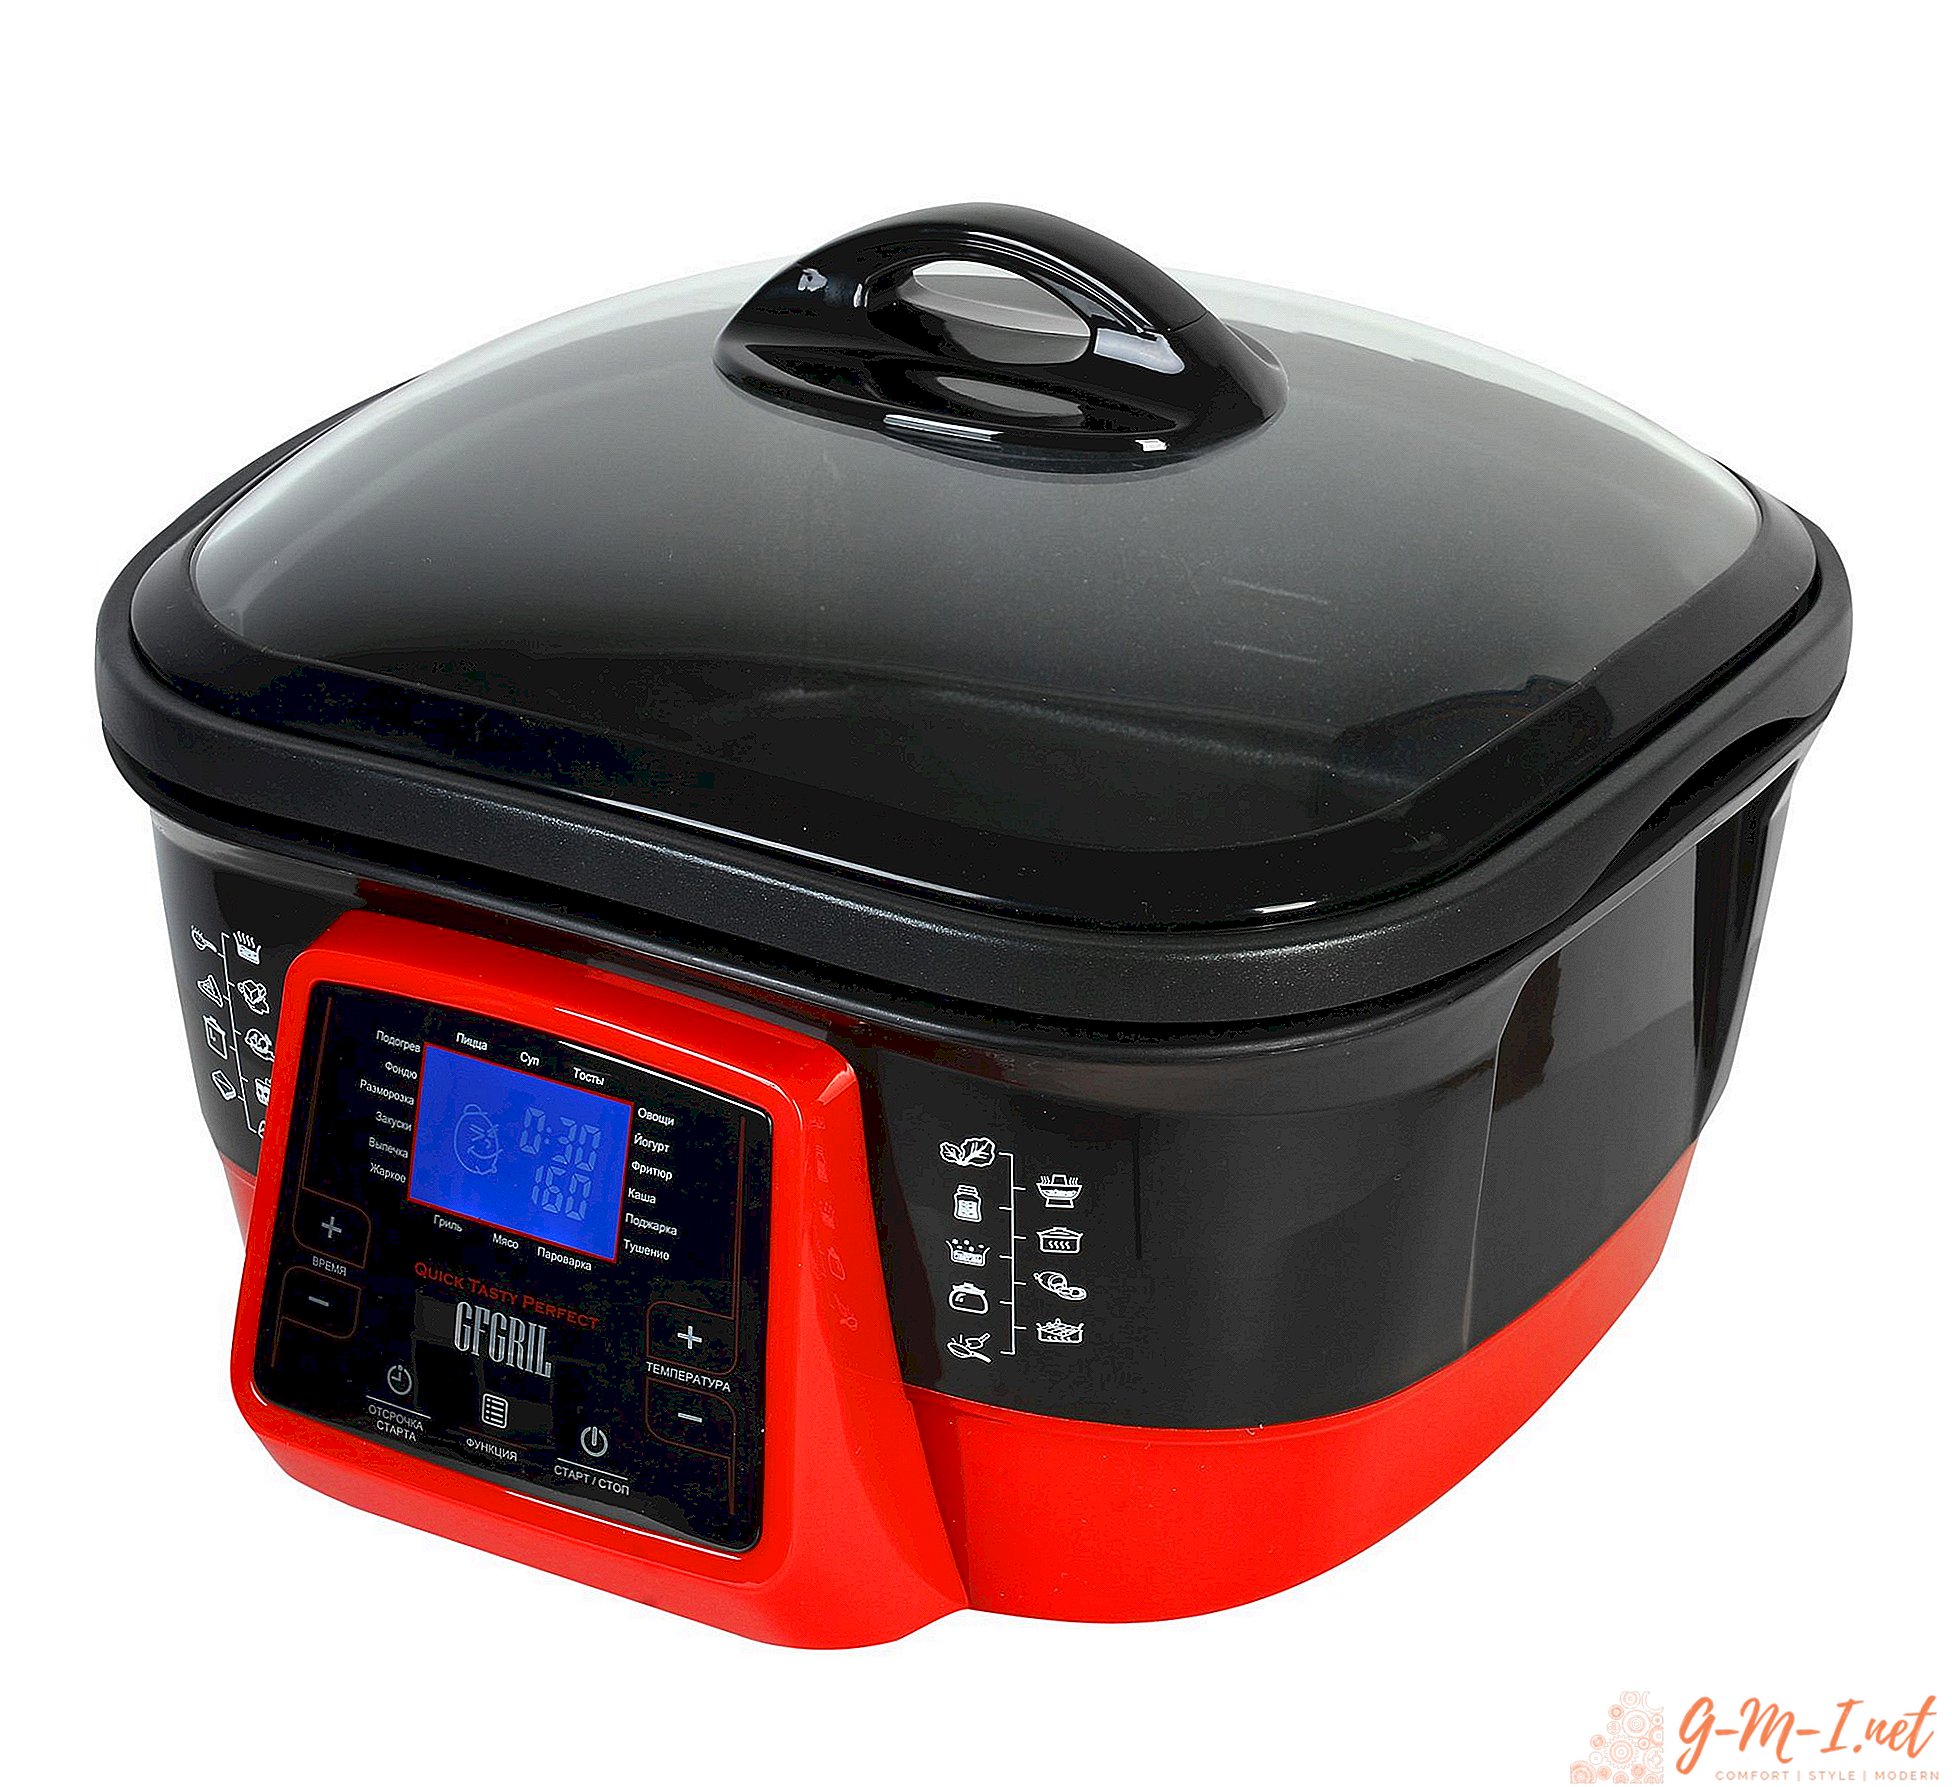 Can I use a slow cooker as a deep fat fryer?